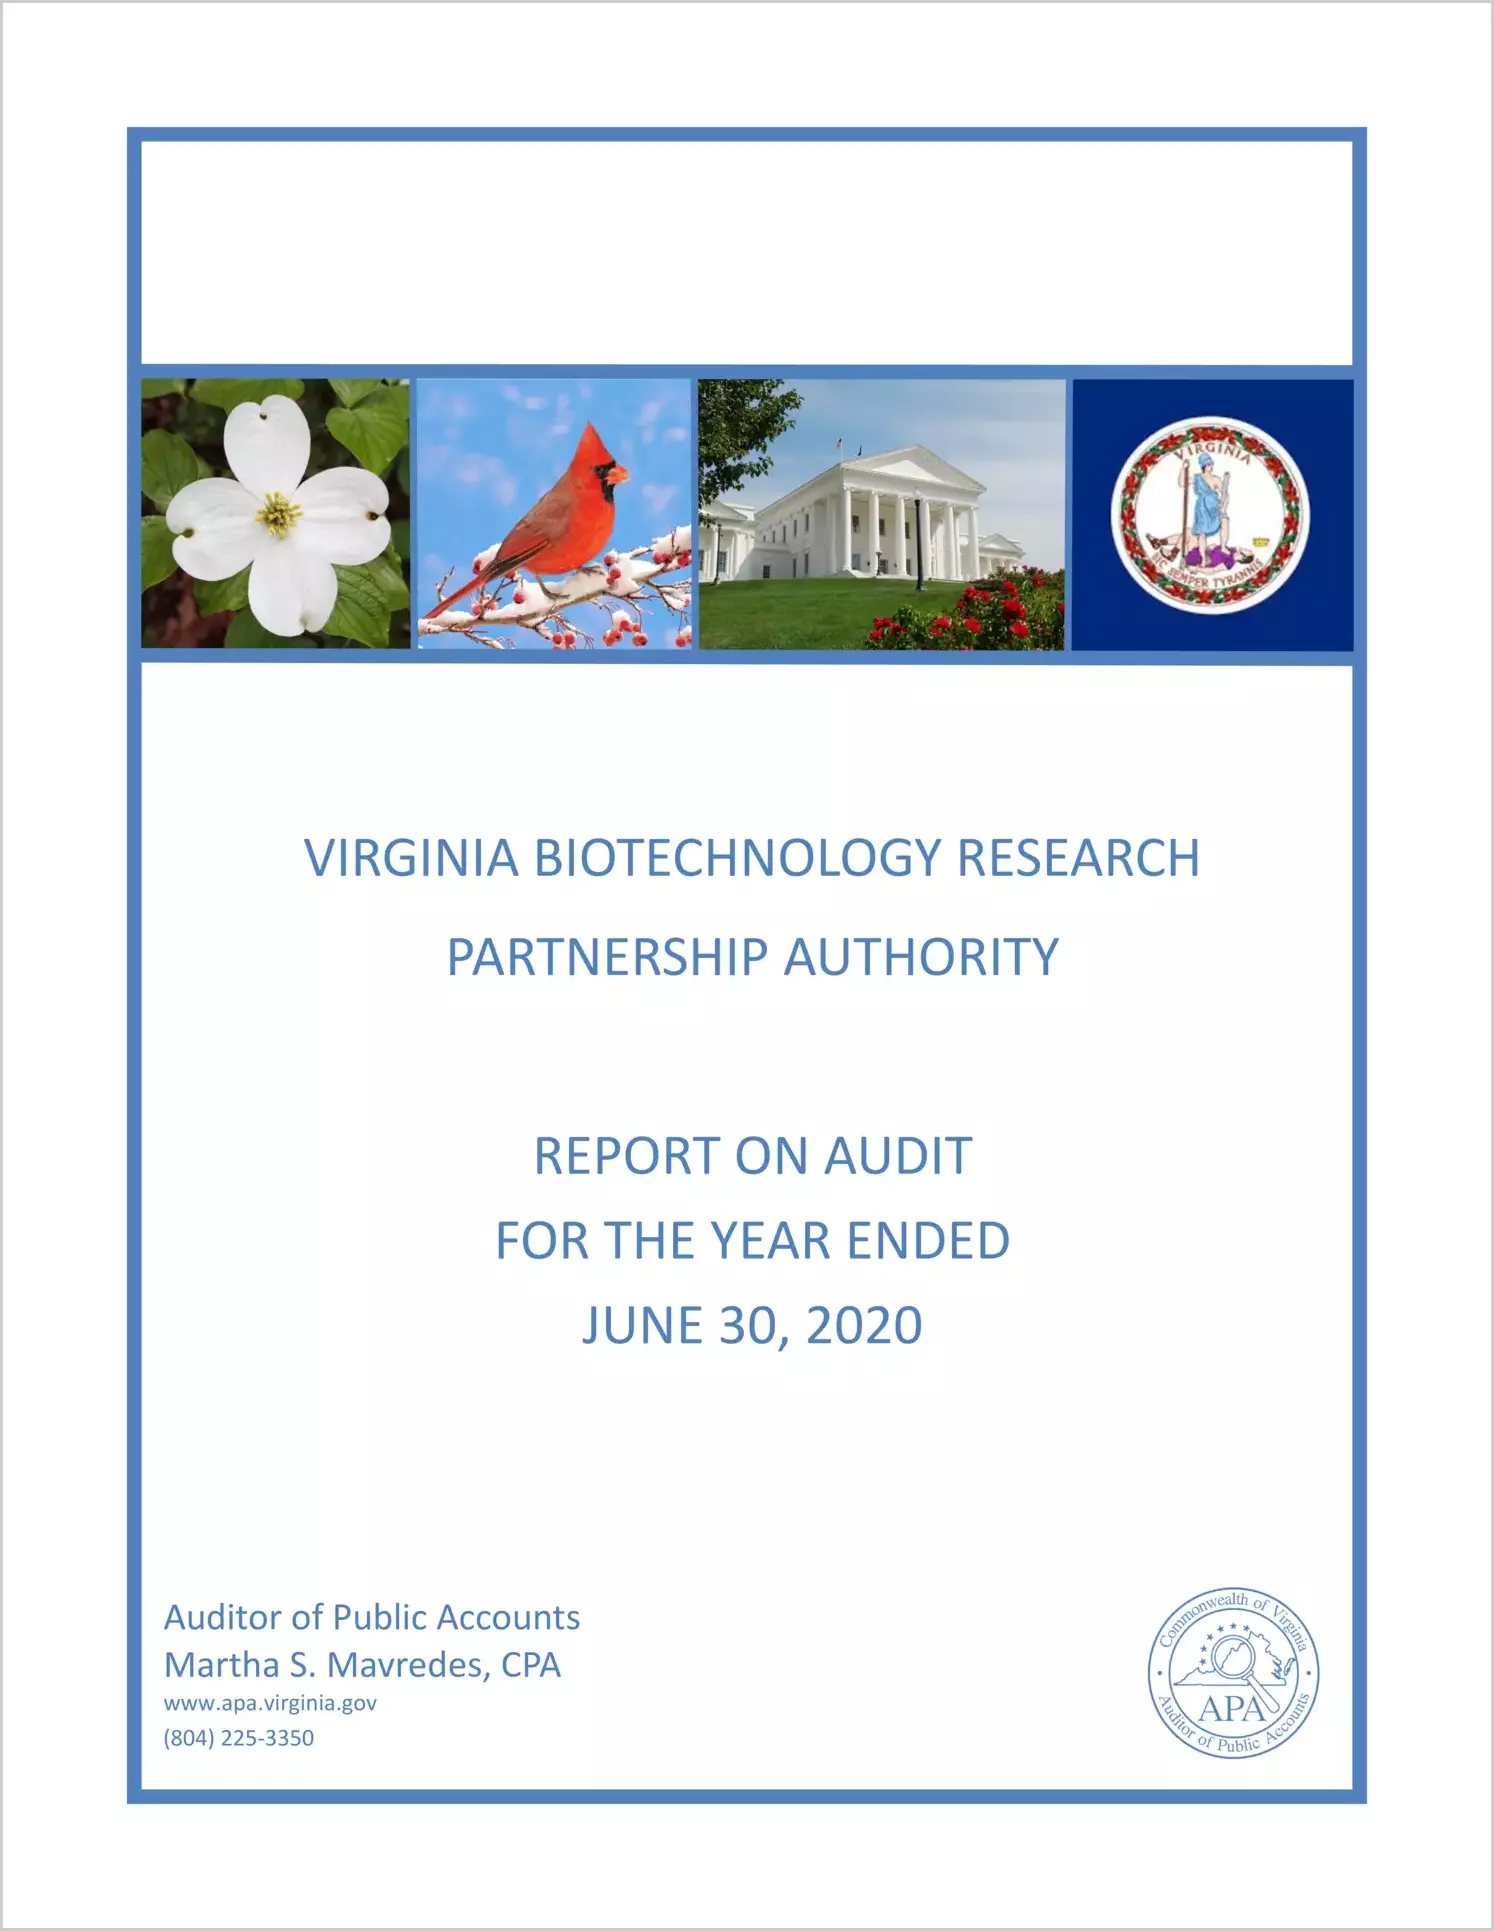 Virginia Biotechnology Research Partnership Authority for the year ended June 30, 2020